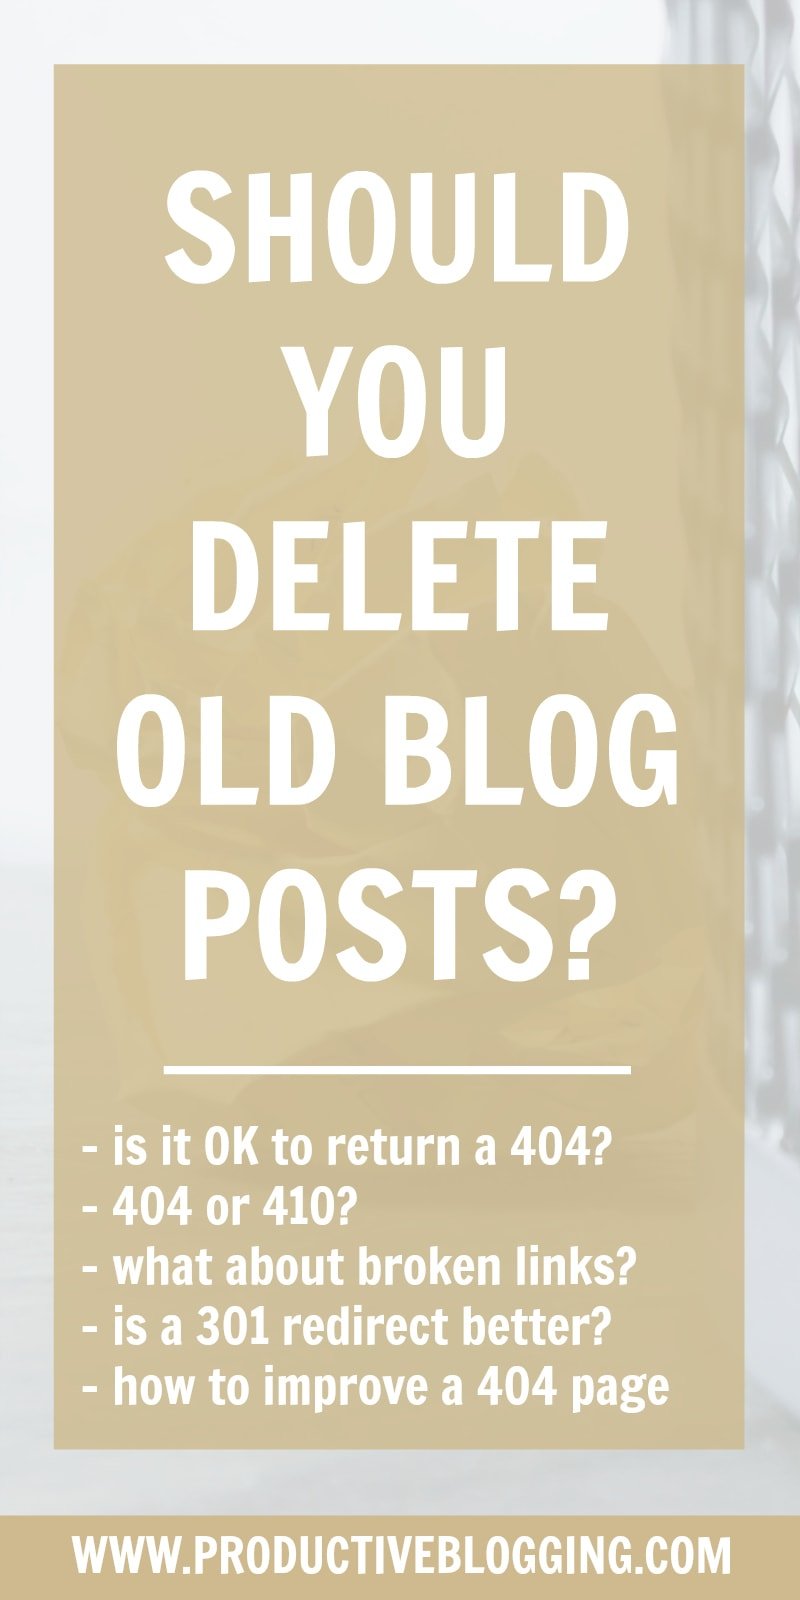 Is it bad to delete old blog posts? Or is it actually beneficial to your SEO and blog traffic to remove old content that does not deliver value? And is it ever OK to simply delete a post and allow it to return a 404 response code or is it better to do a 301 redirect? In this guide to deleting old blog posts I explain all! #evergreencontent #thincontent #404notfound #404error #301redirect #301redirects #brokenlinks #sitestructure #seo #seotips #whatgooglesays #bloggingtips #productiveblogging